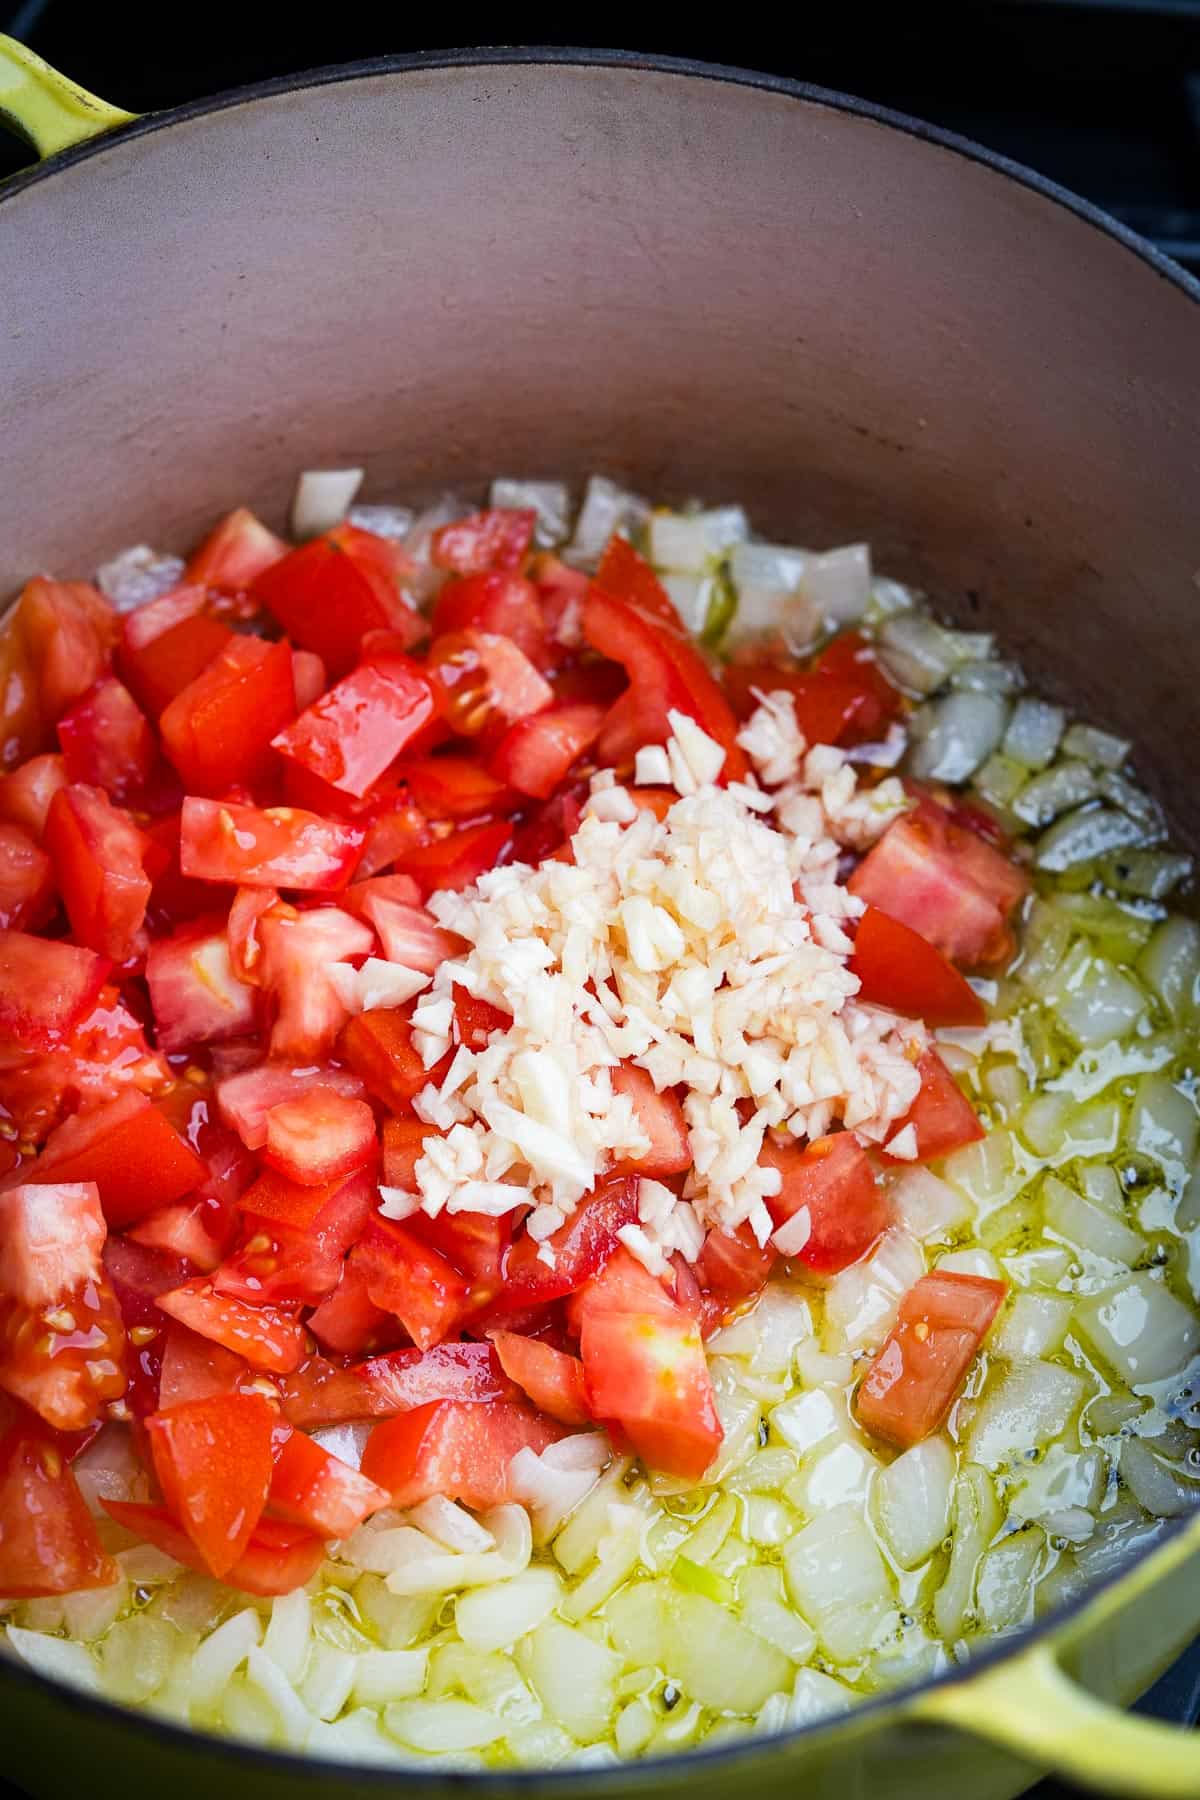 A pot with tomatoes, garlic and onions in it.